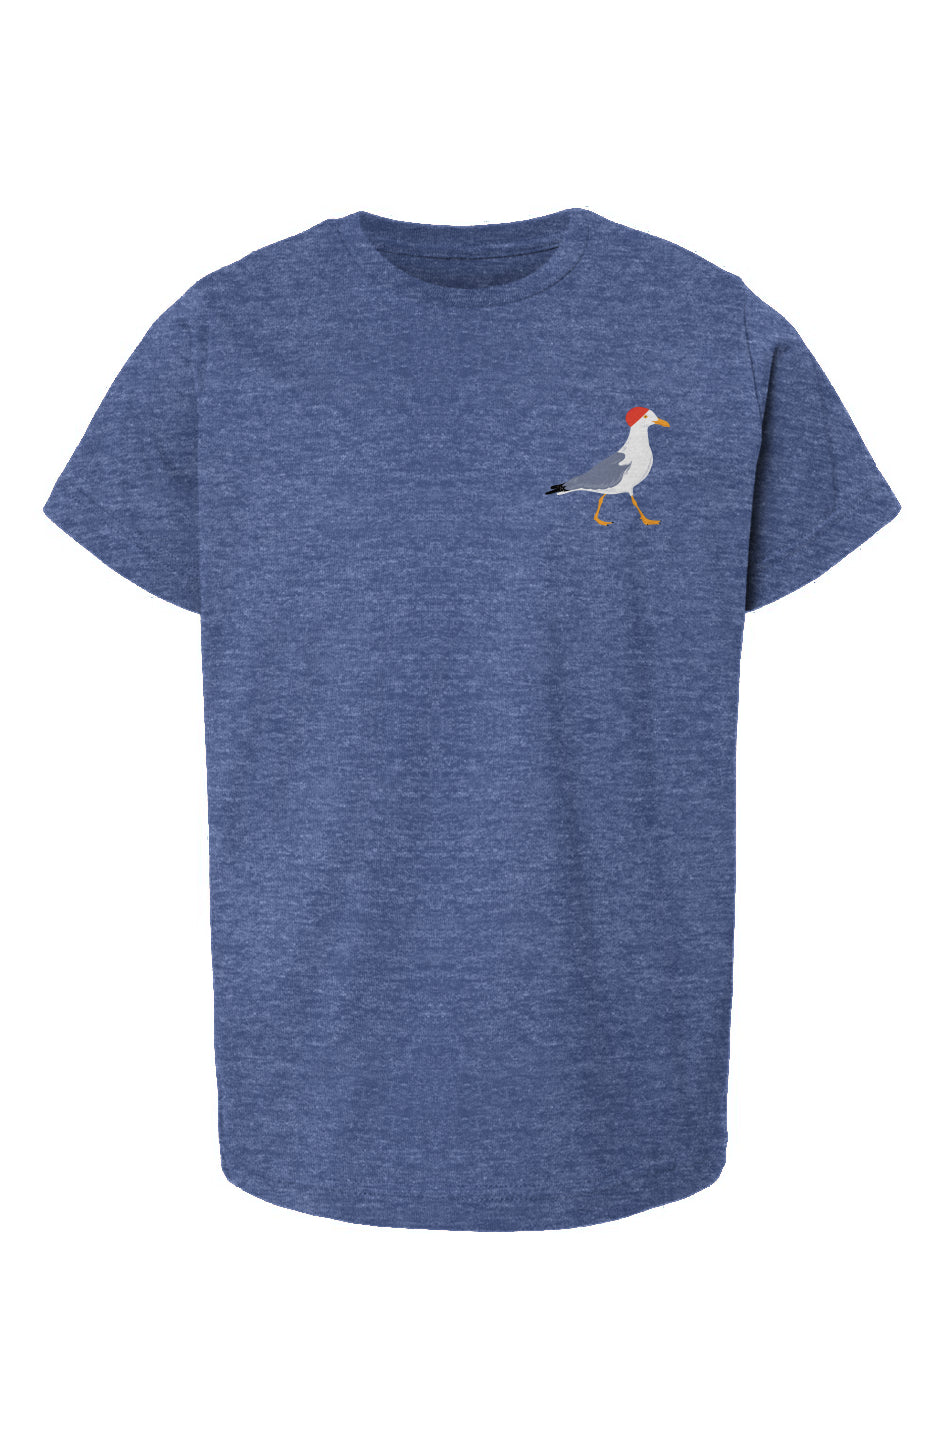 Steven SeaGull Youth Tee